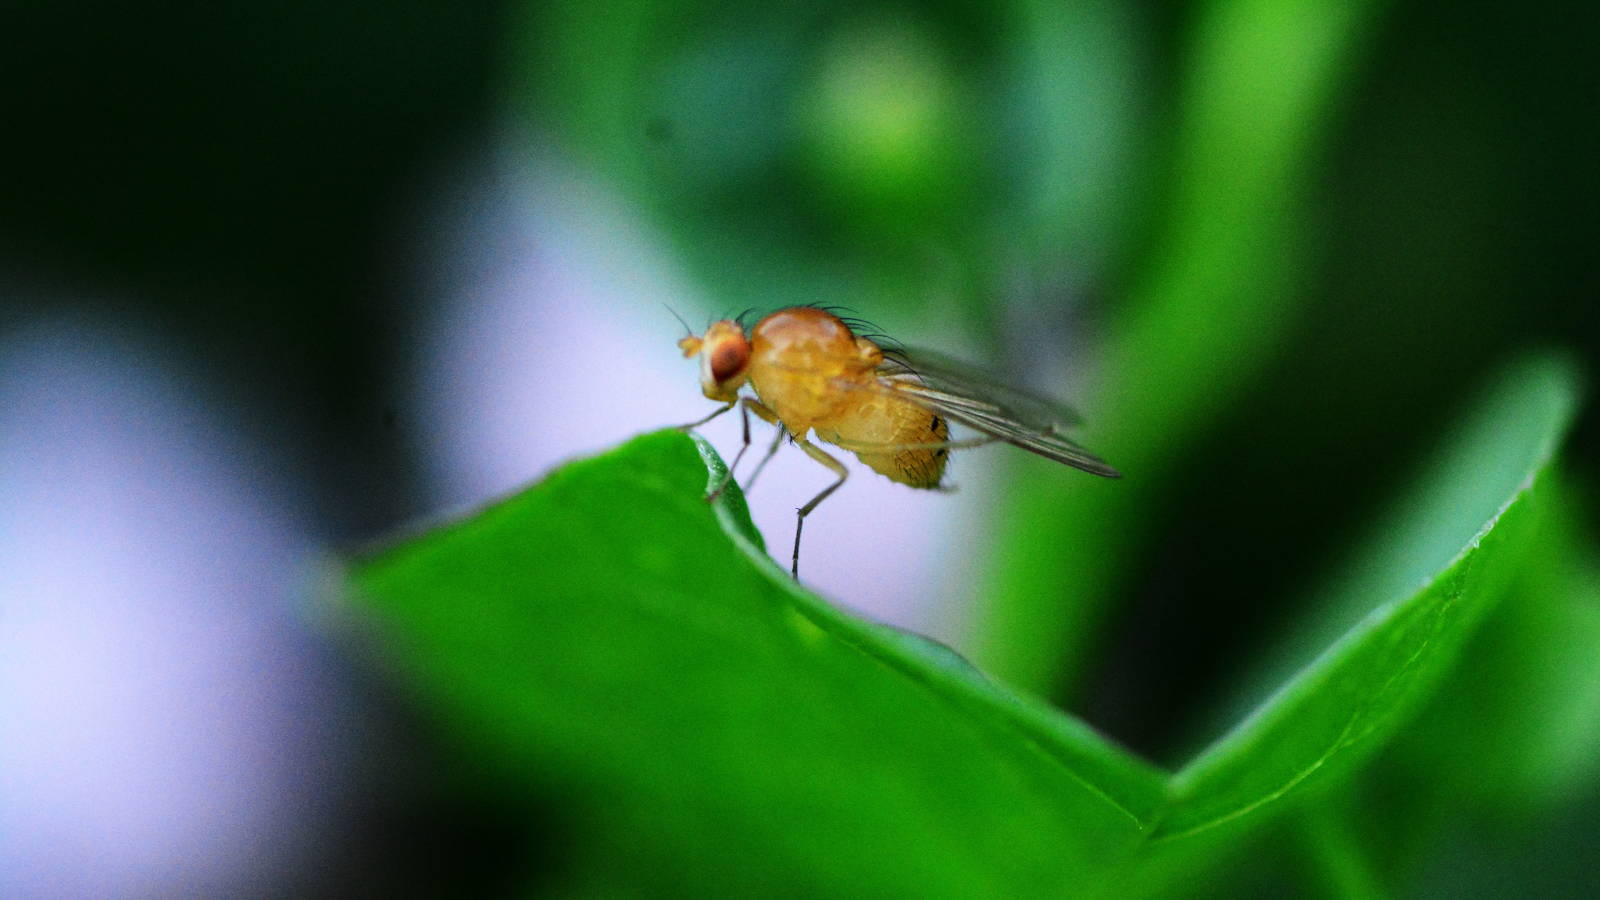 Close up of a fruit fly on green leaf. Photo for blog article, 'Why Fruit Flies?'